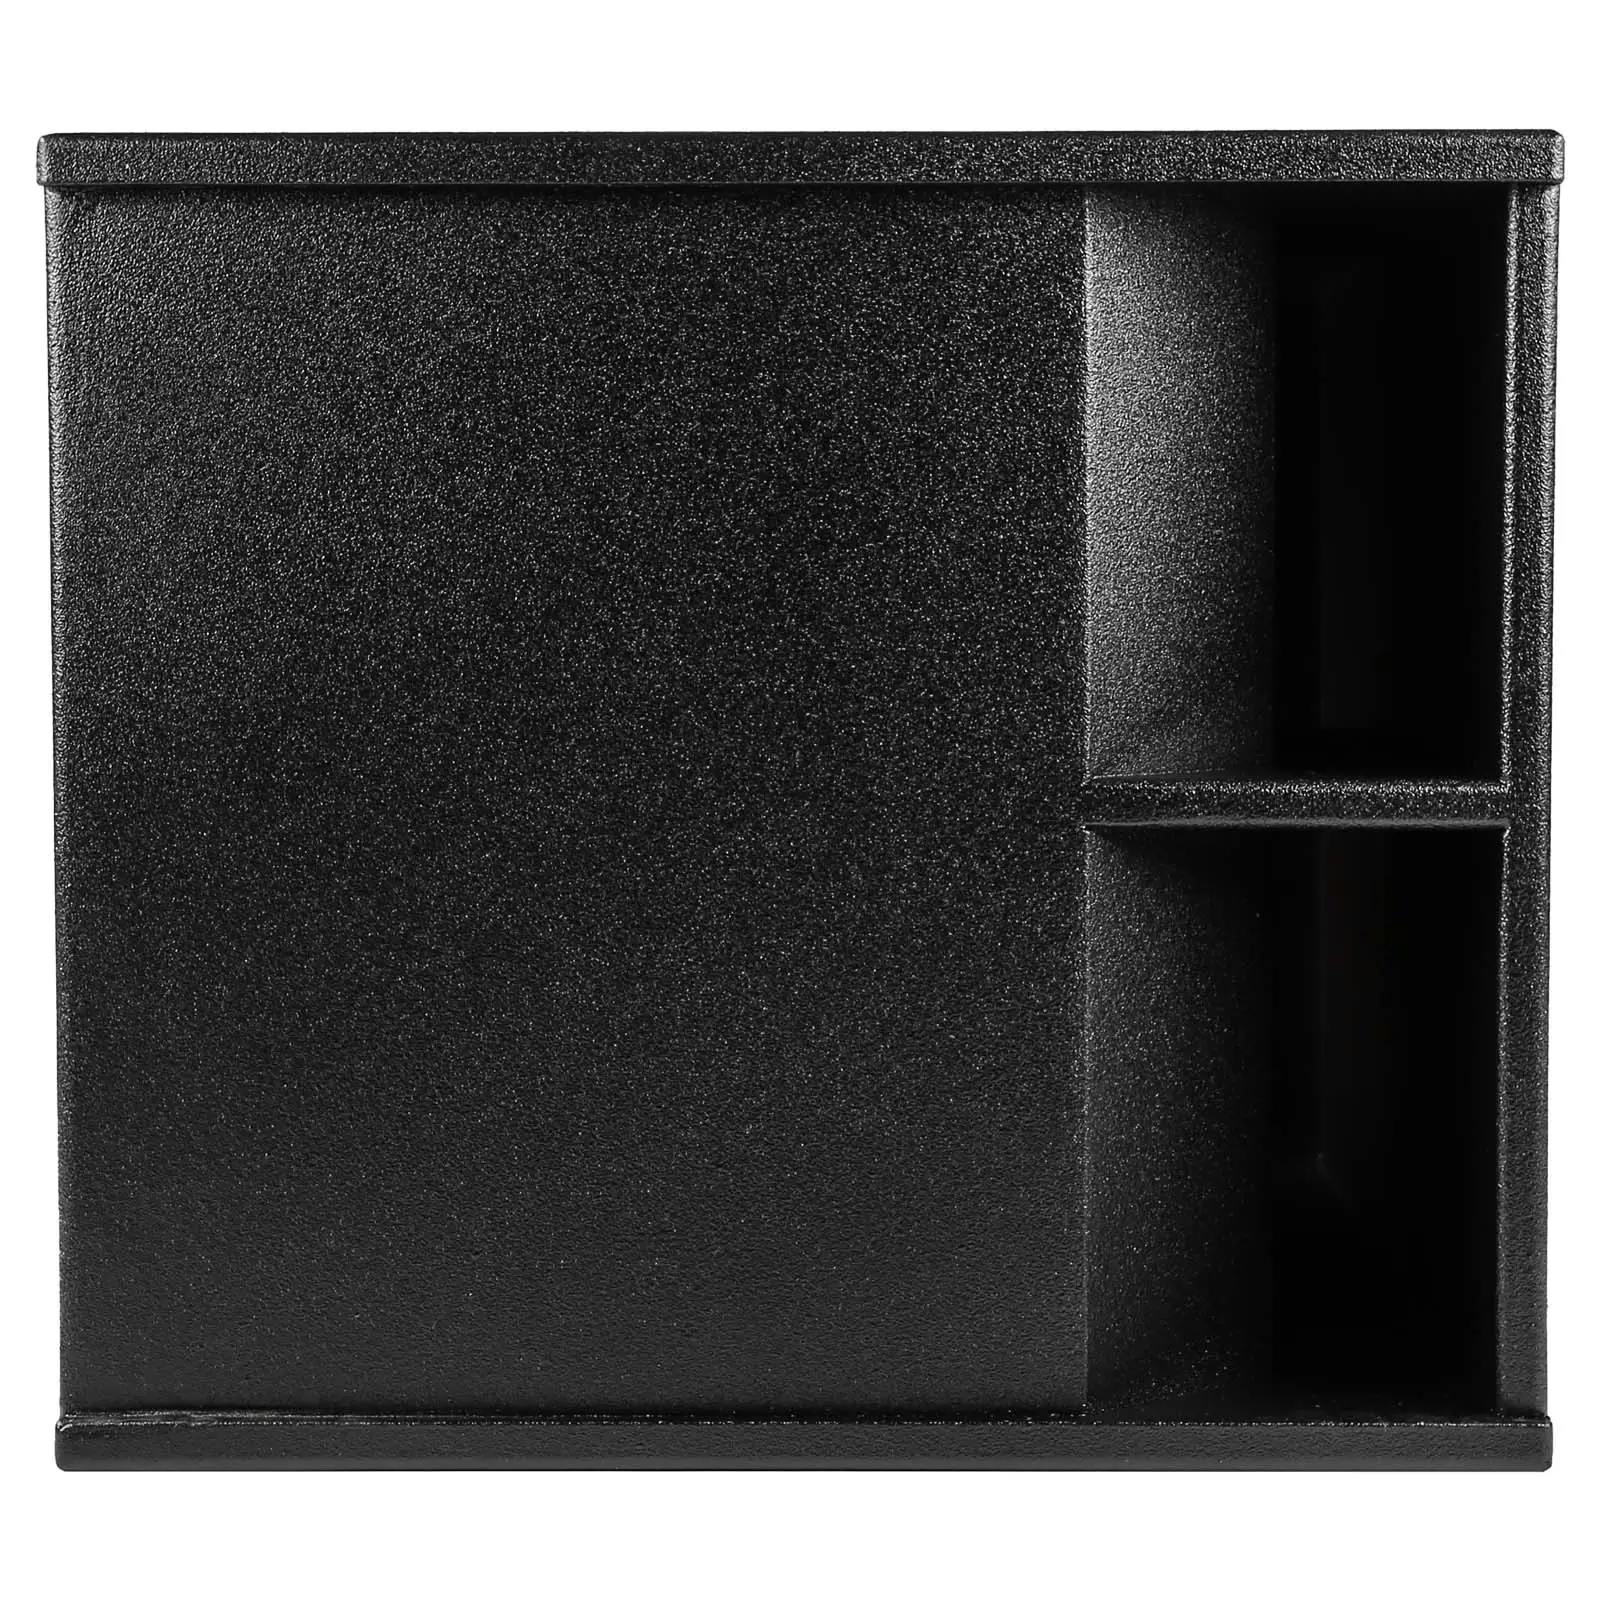 Featured Product Photo 4 for Single 15" 'SPL Series' Armor Coated Ported Subwoofer Enclosure